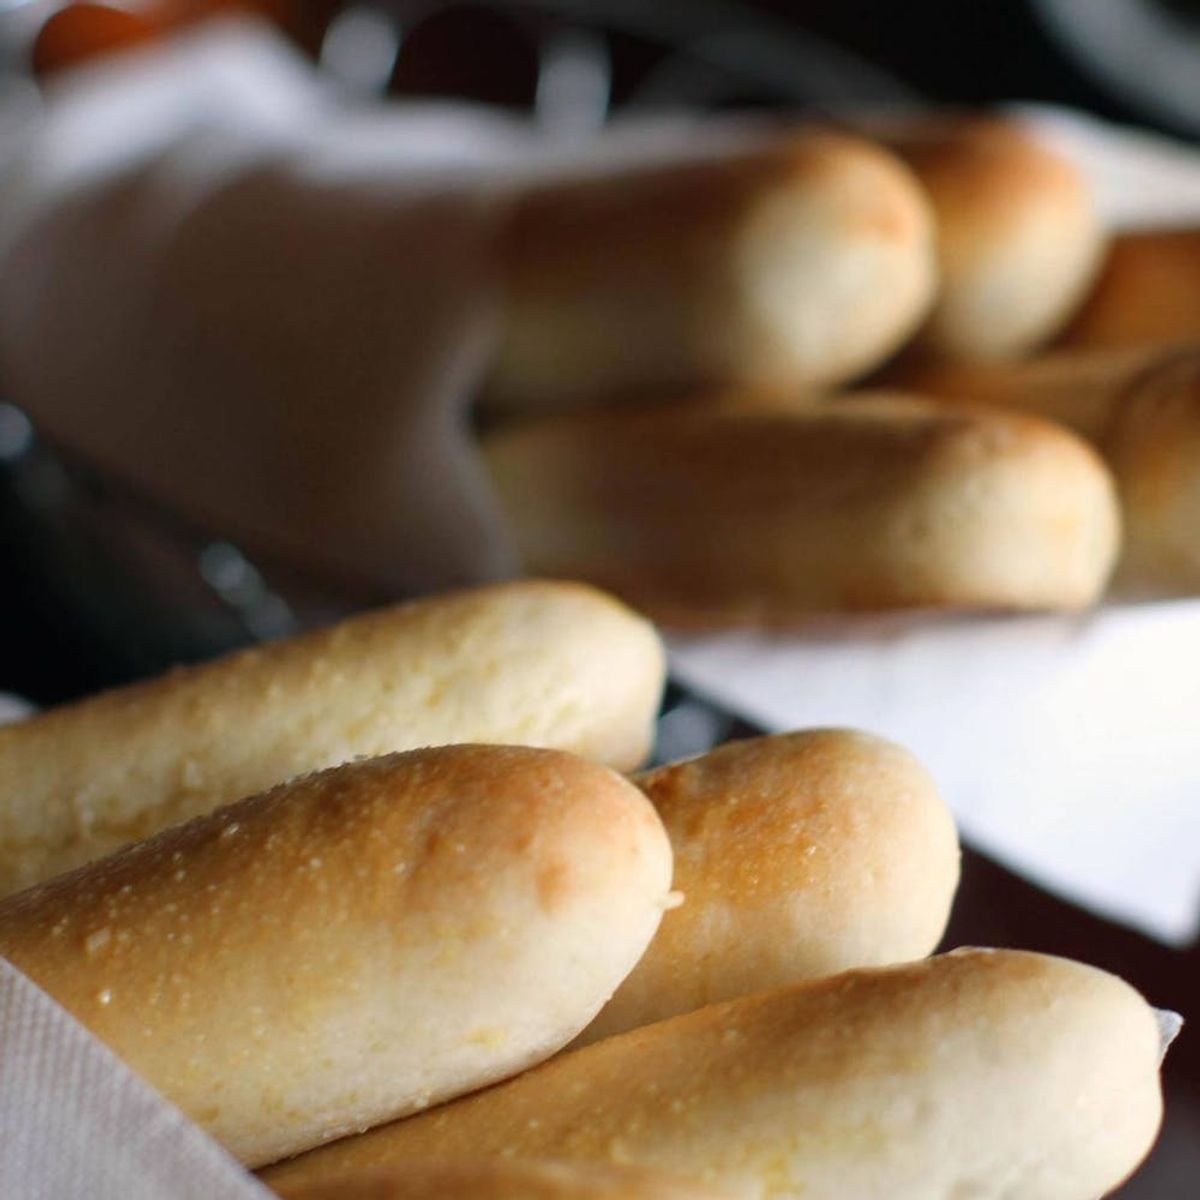 OMG: Olive Garden Breadsticks May Soon Be Available for Purchase on Amazon